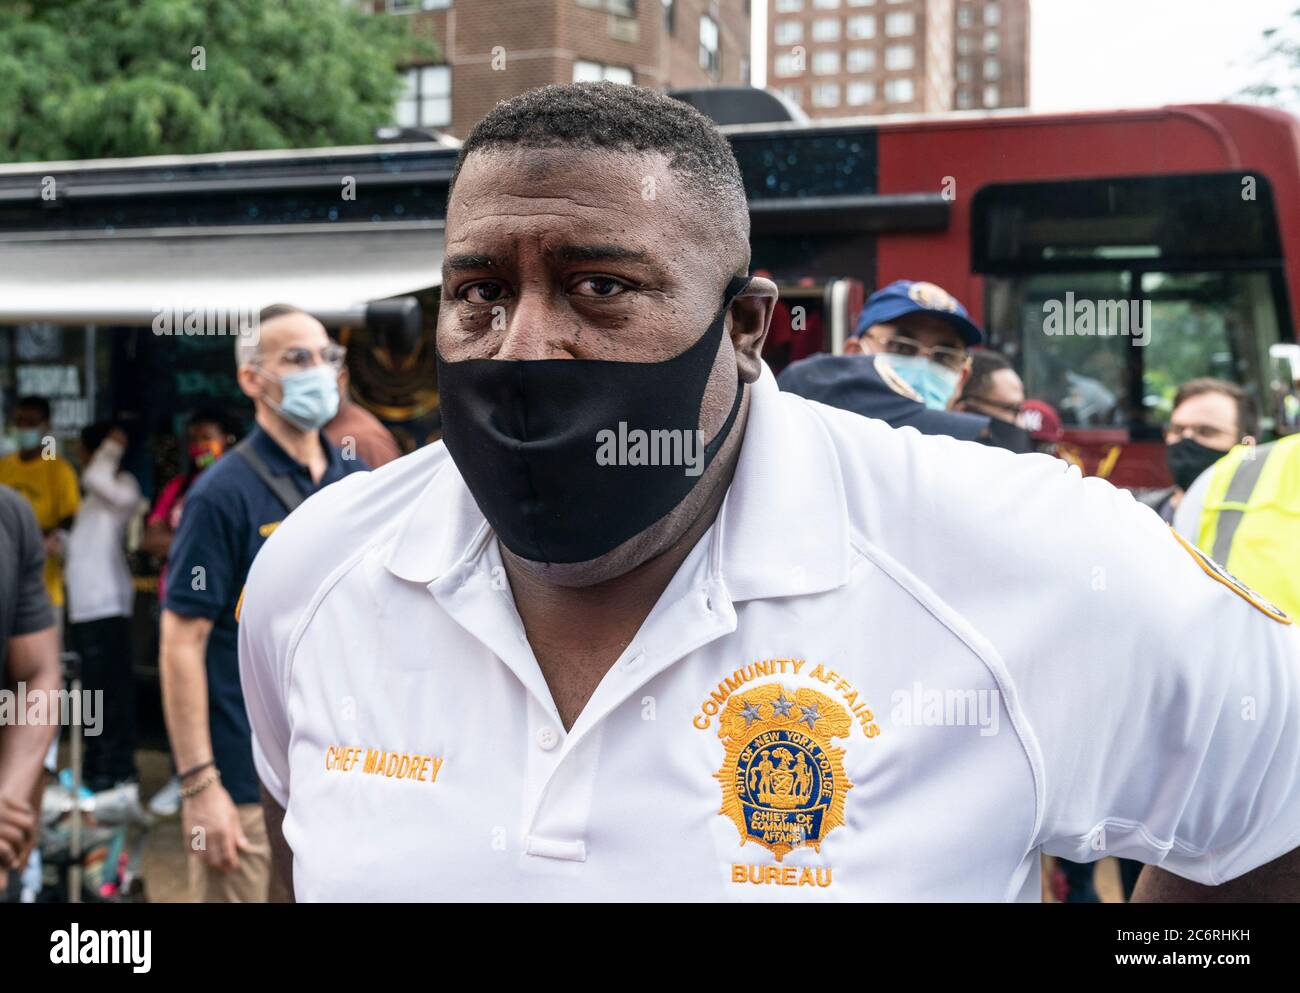 New York, NY - July 11, 2020: NYPD Chief Jeffrey Maddrey attends Occupy the Corner rally in East Harlem in response on gun violence Stock Photo